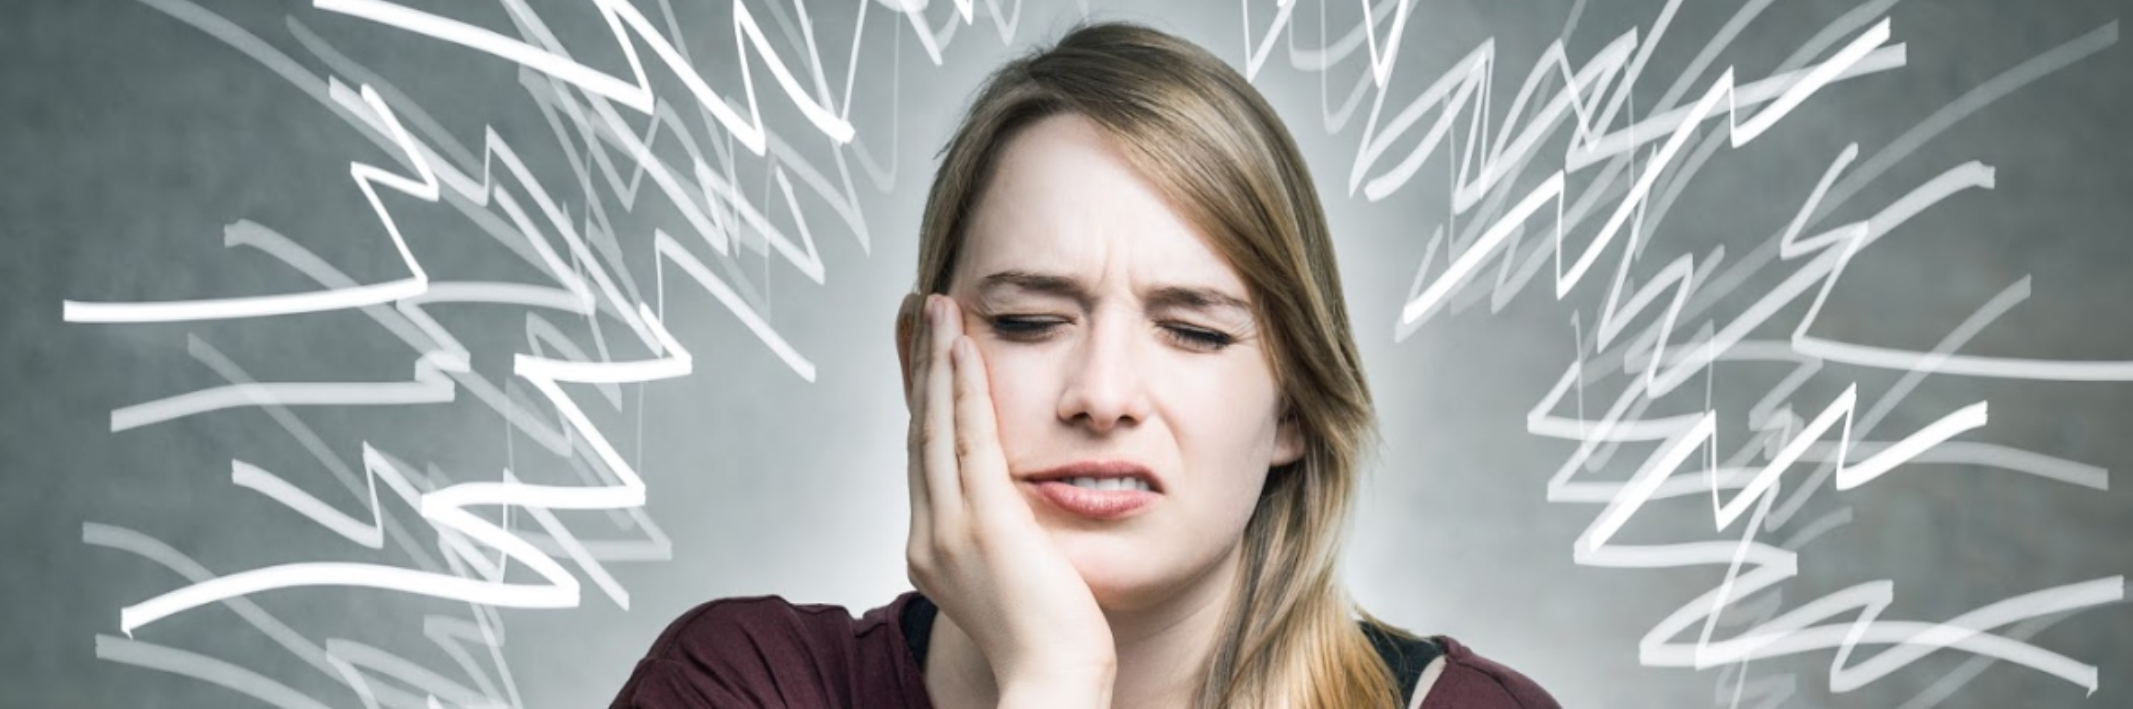 When Does A Toothache Indicate Something Serious?